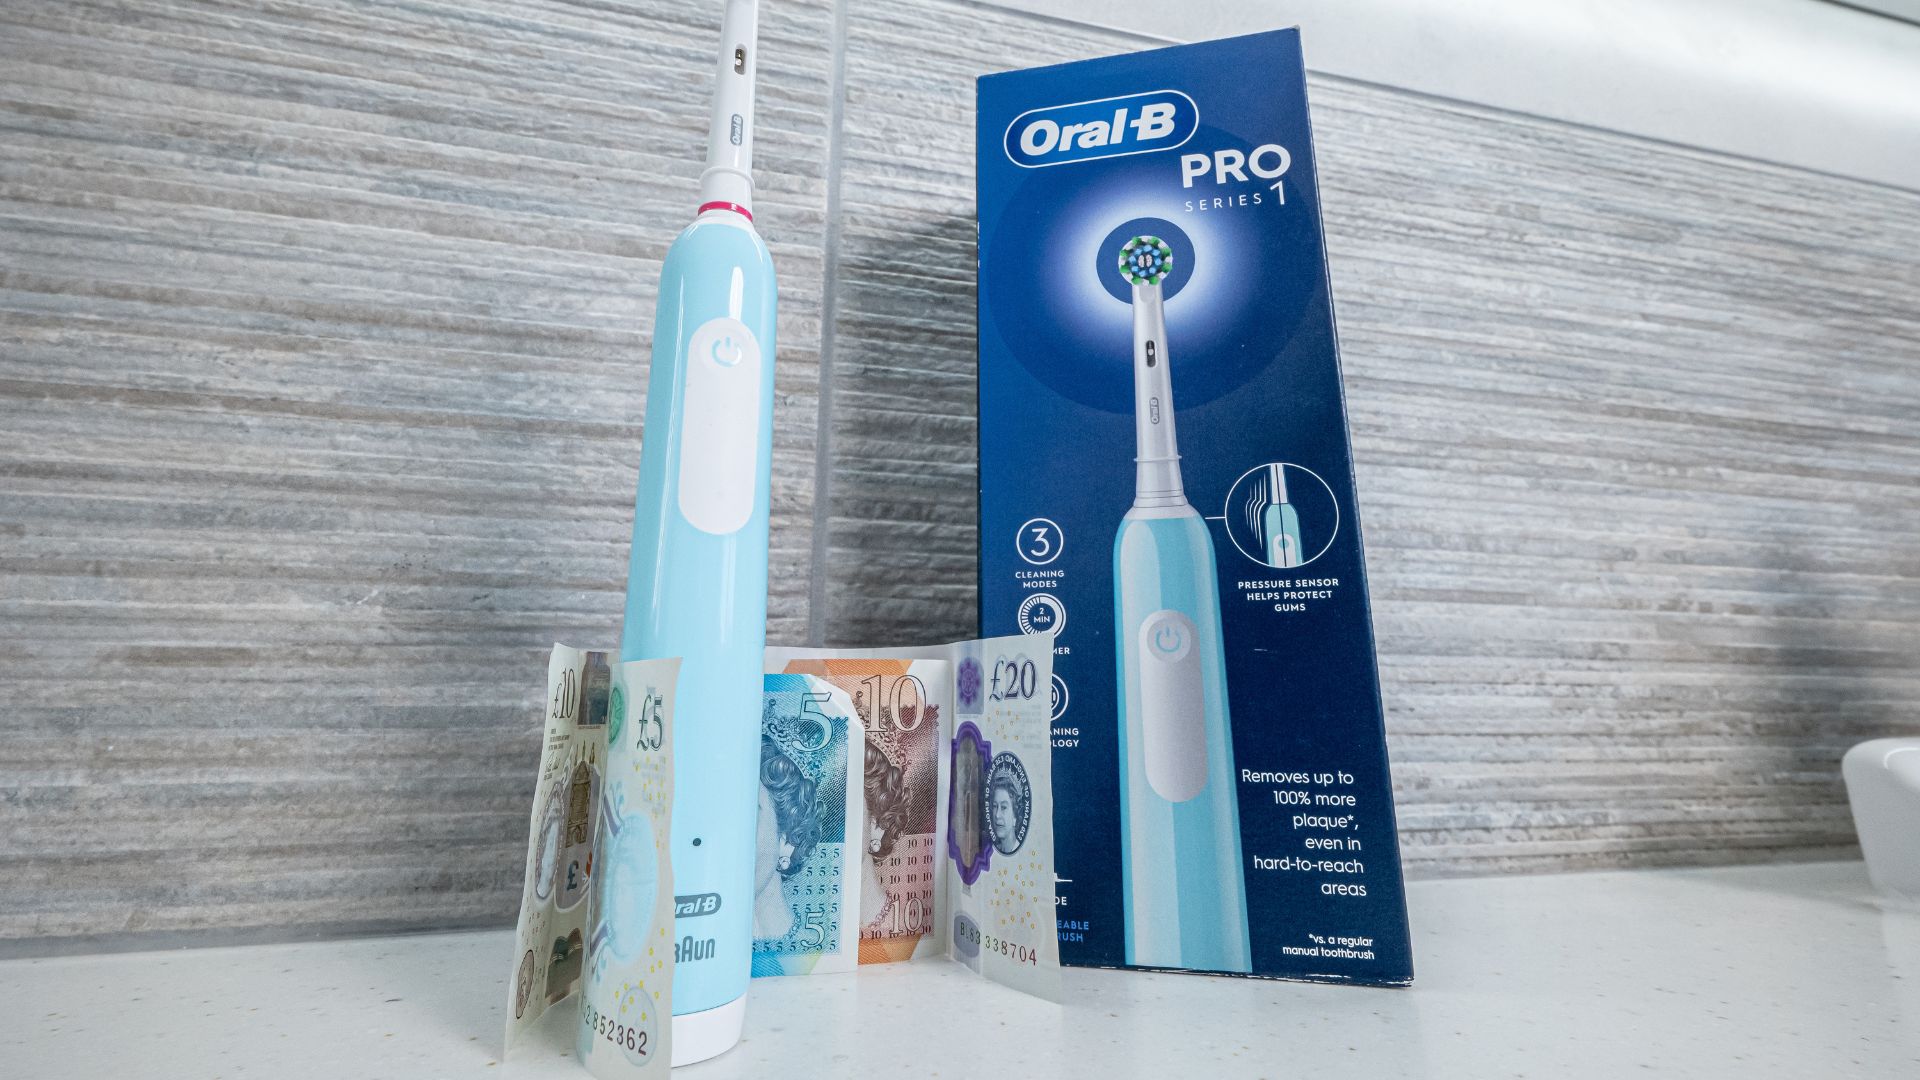 Pro 1 electric toothbrush with its packaging